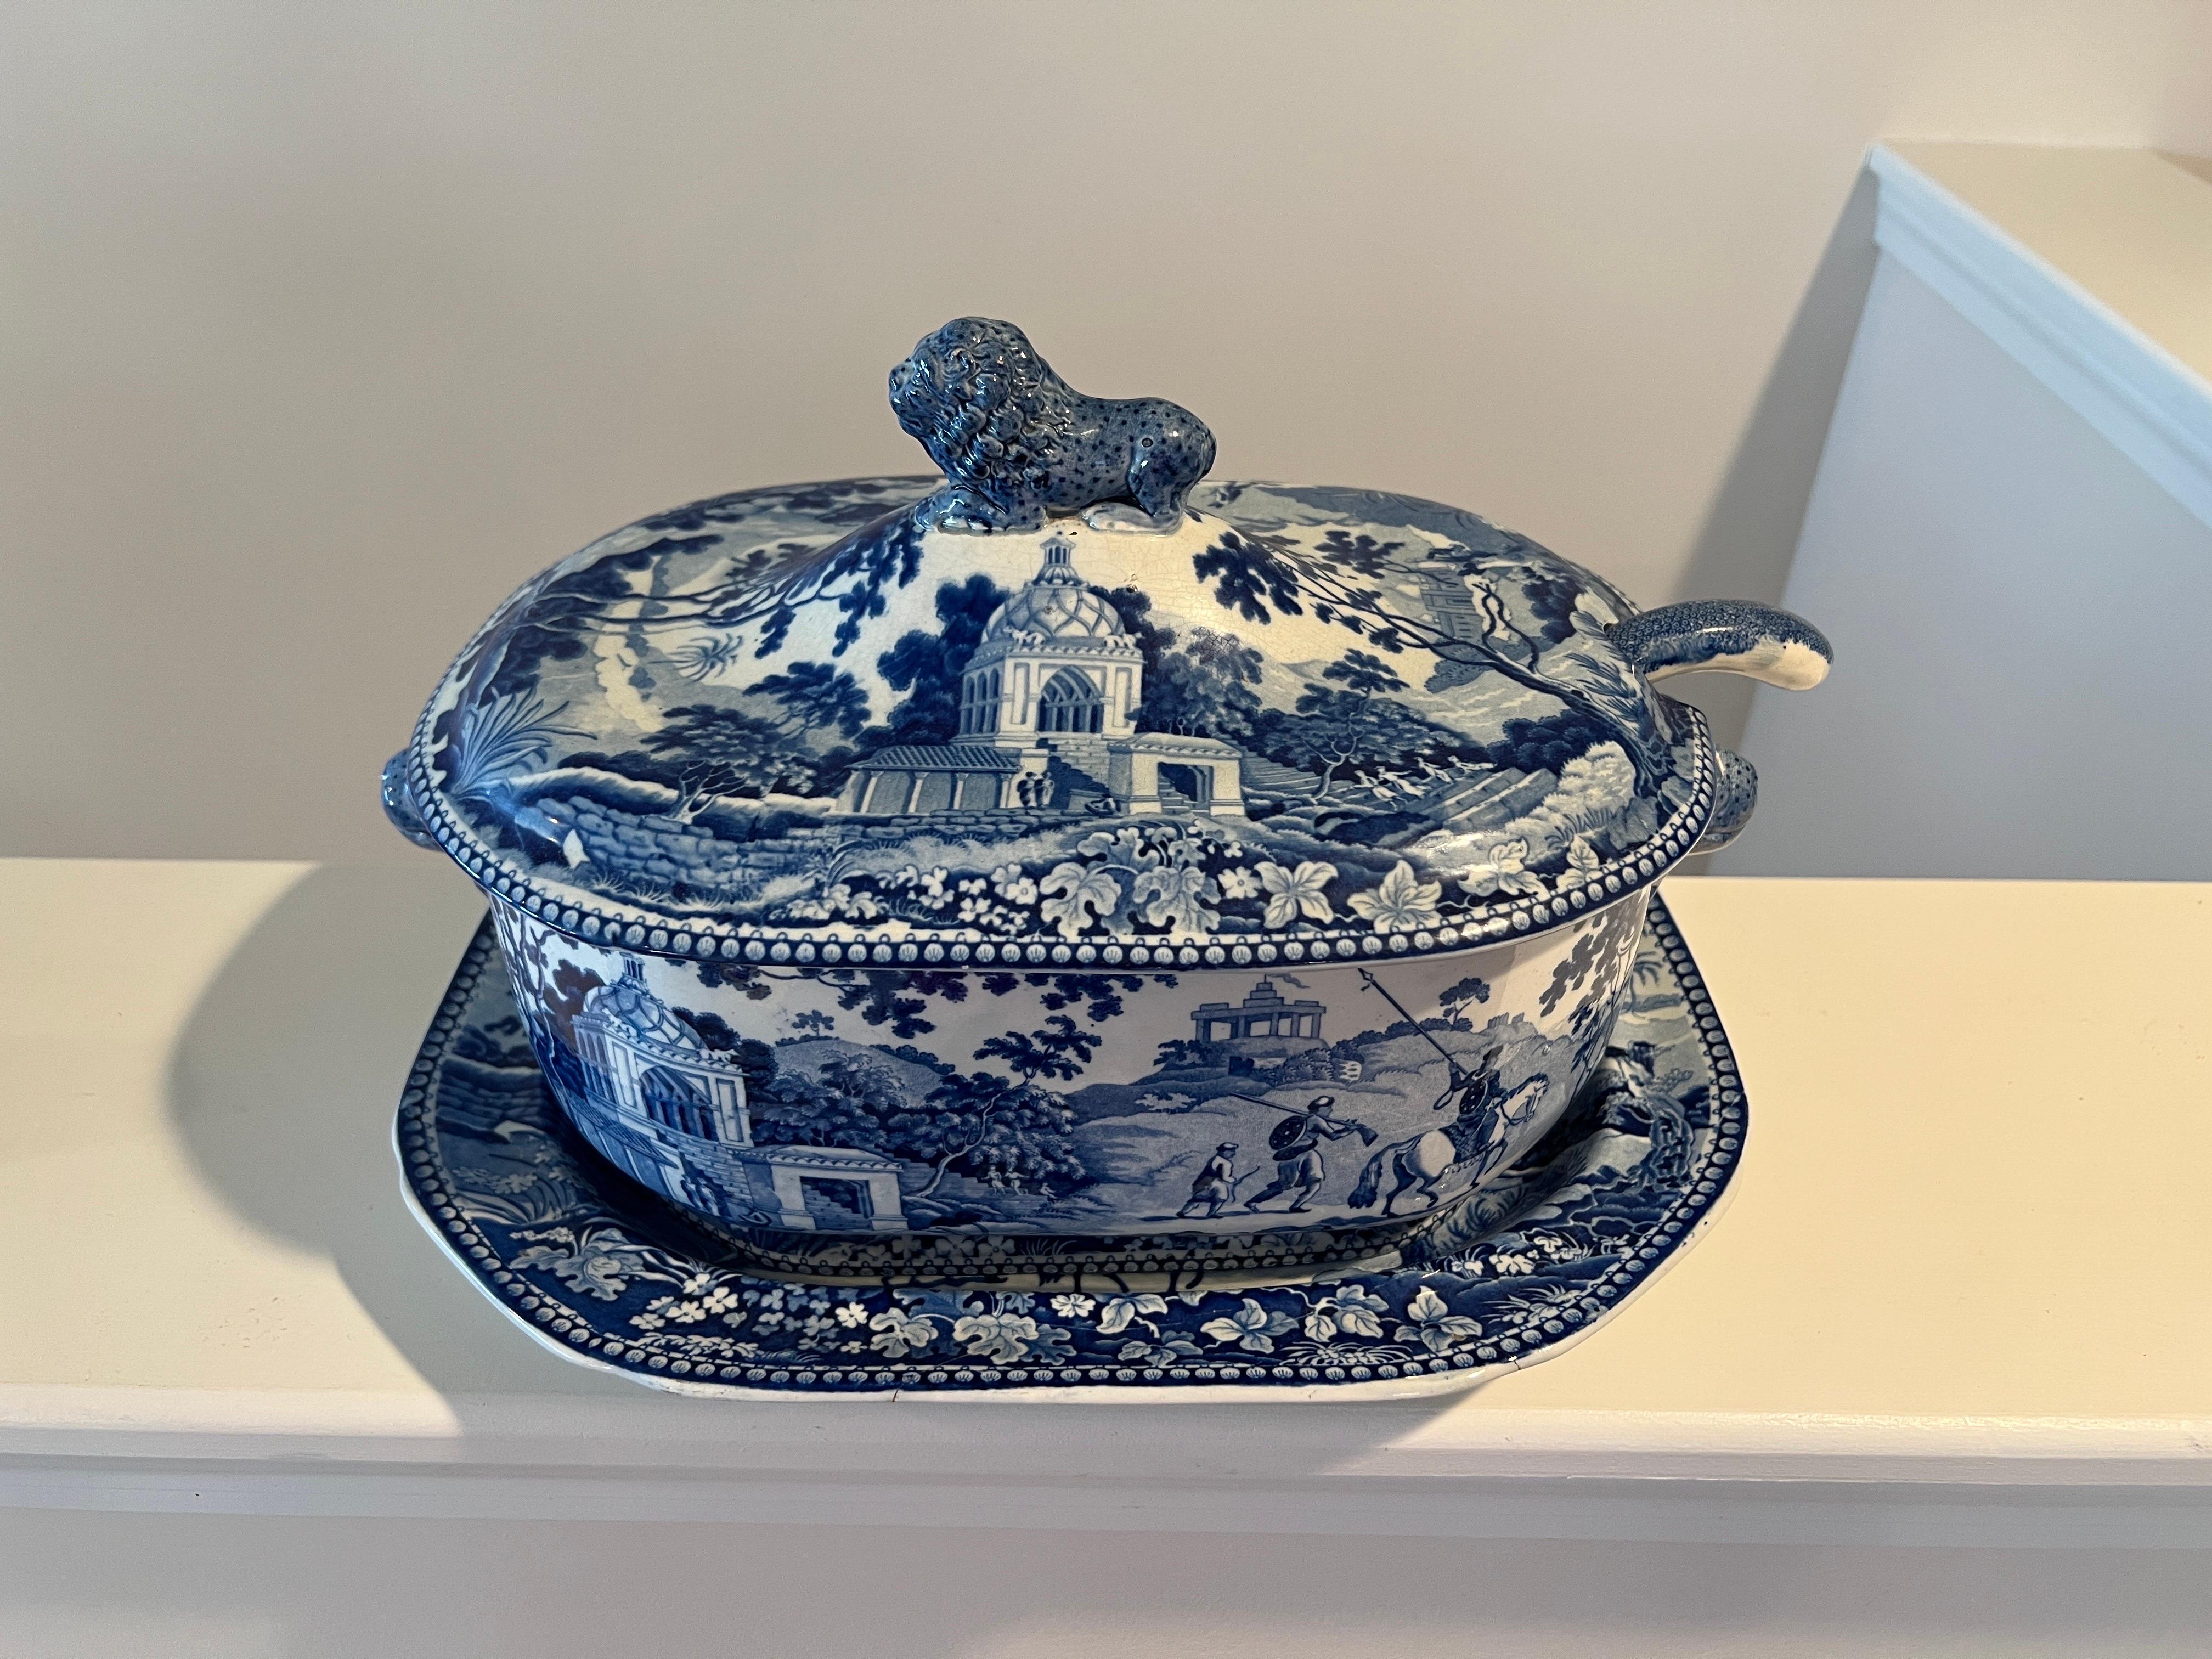 John Rogers & Sons Factory (English, 1795-1830), circa 1820. 
A 3 piece Georgian pearlware collection comprising of a tureen with lid, soup ladle and under tray. The tureen is adorned with a full bodied lion finial, large lion head handles to body